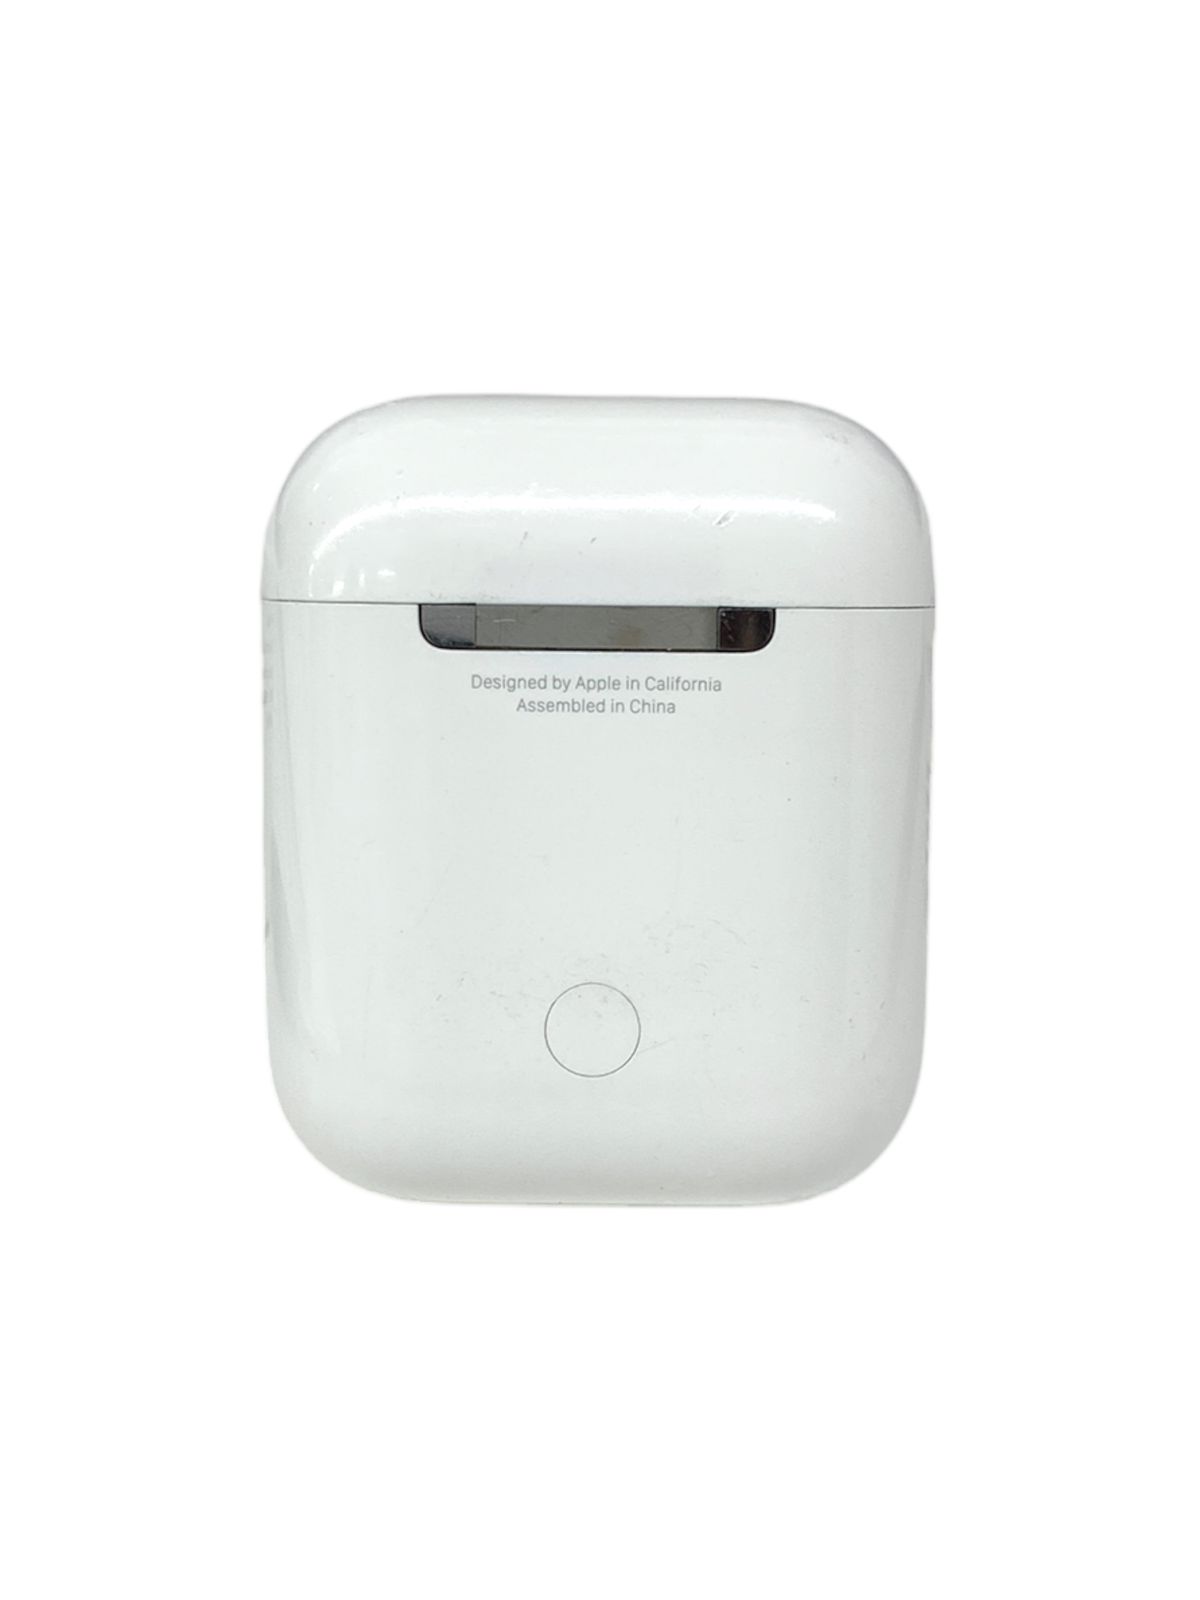 Apple(アップル) AirPods エアポッズ with Charging Case (第2世代